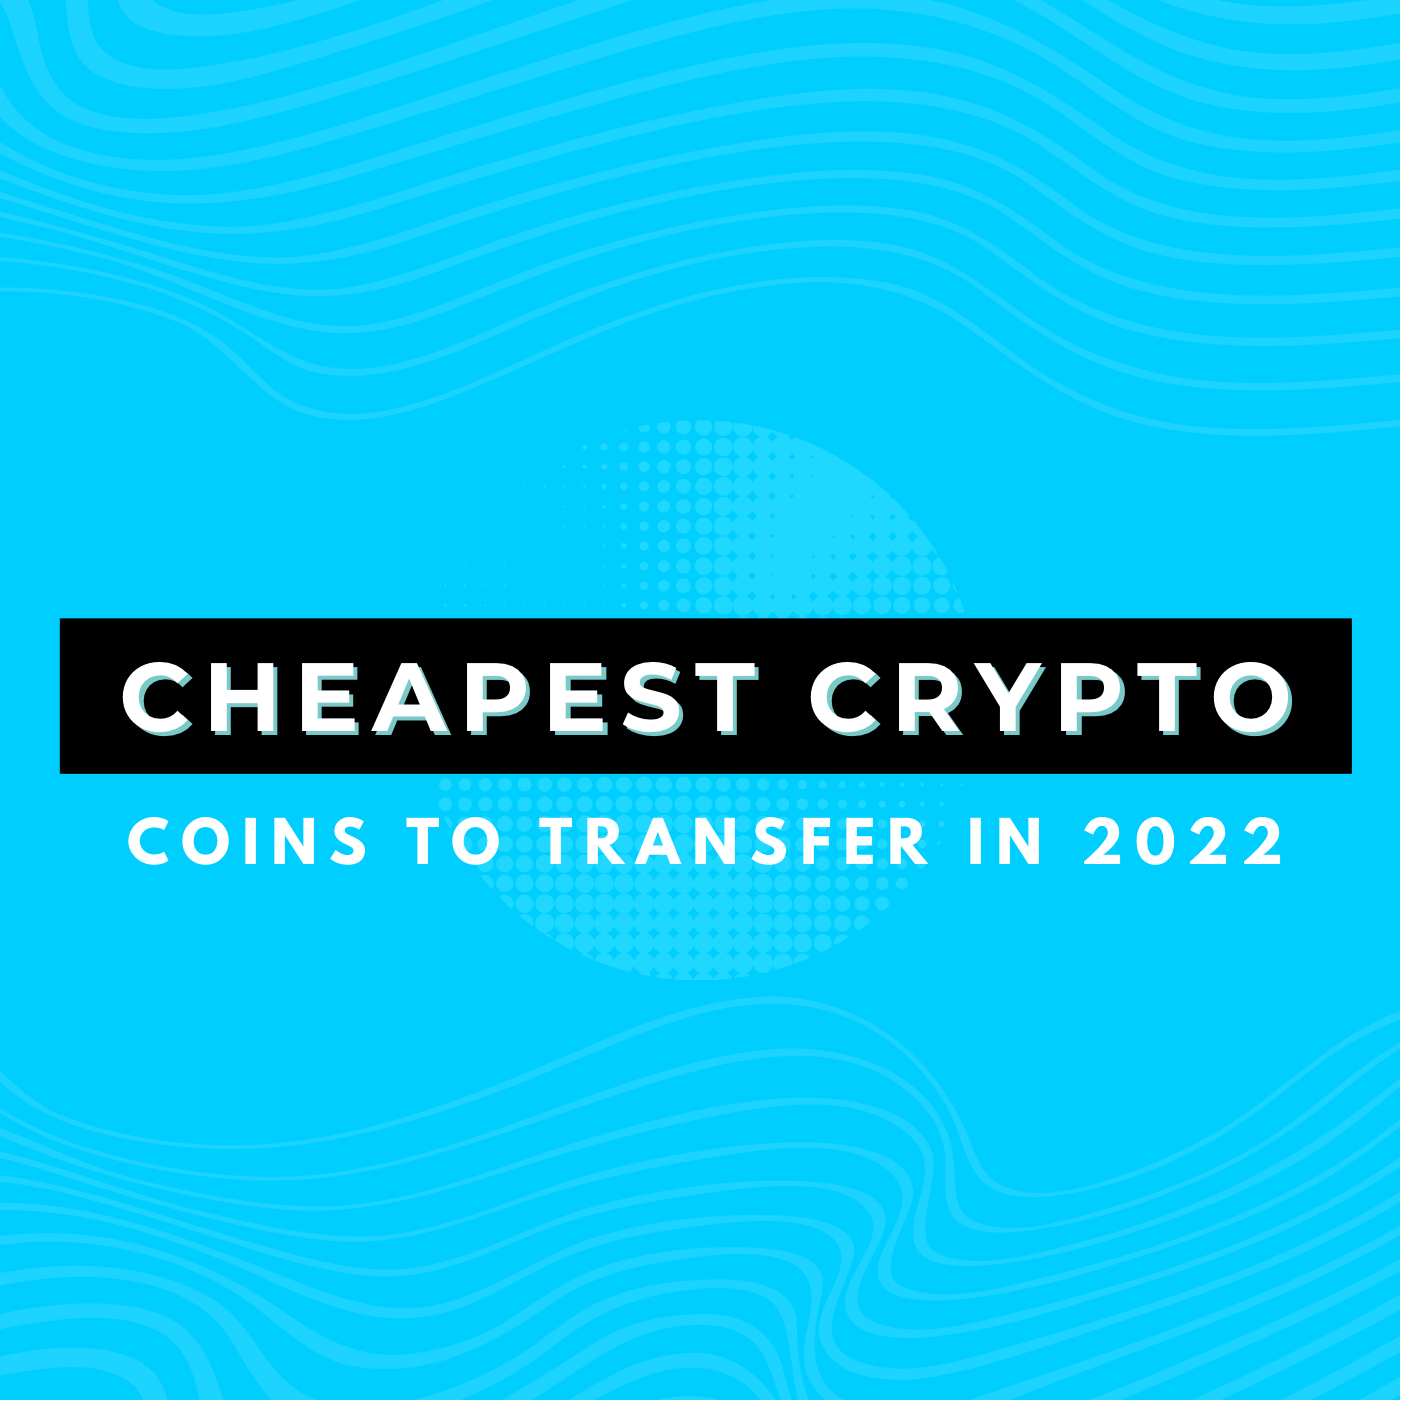 Cheapest Crypto Coins To Transfer In 2022